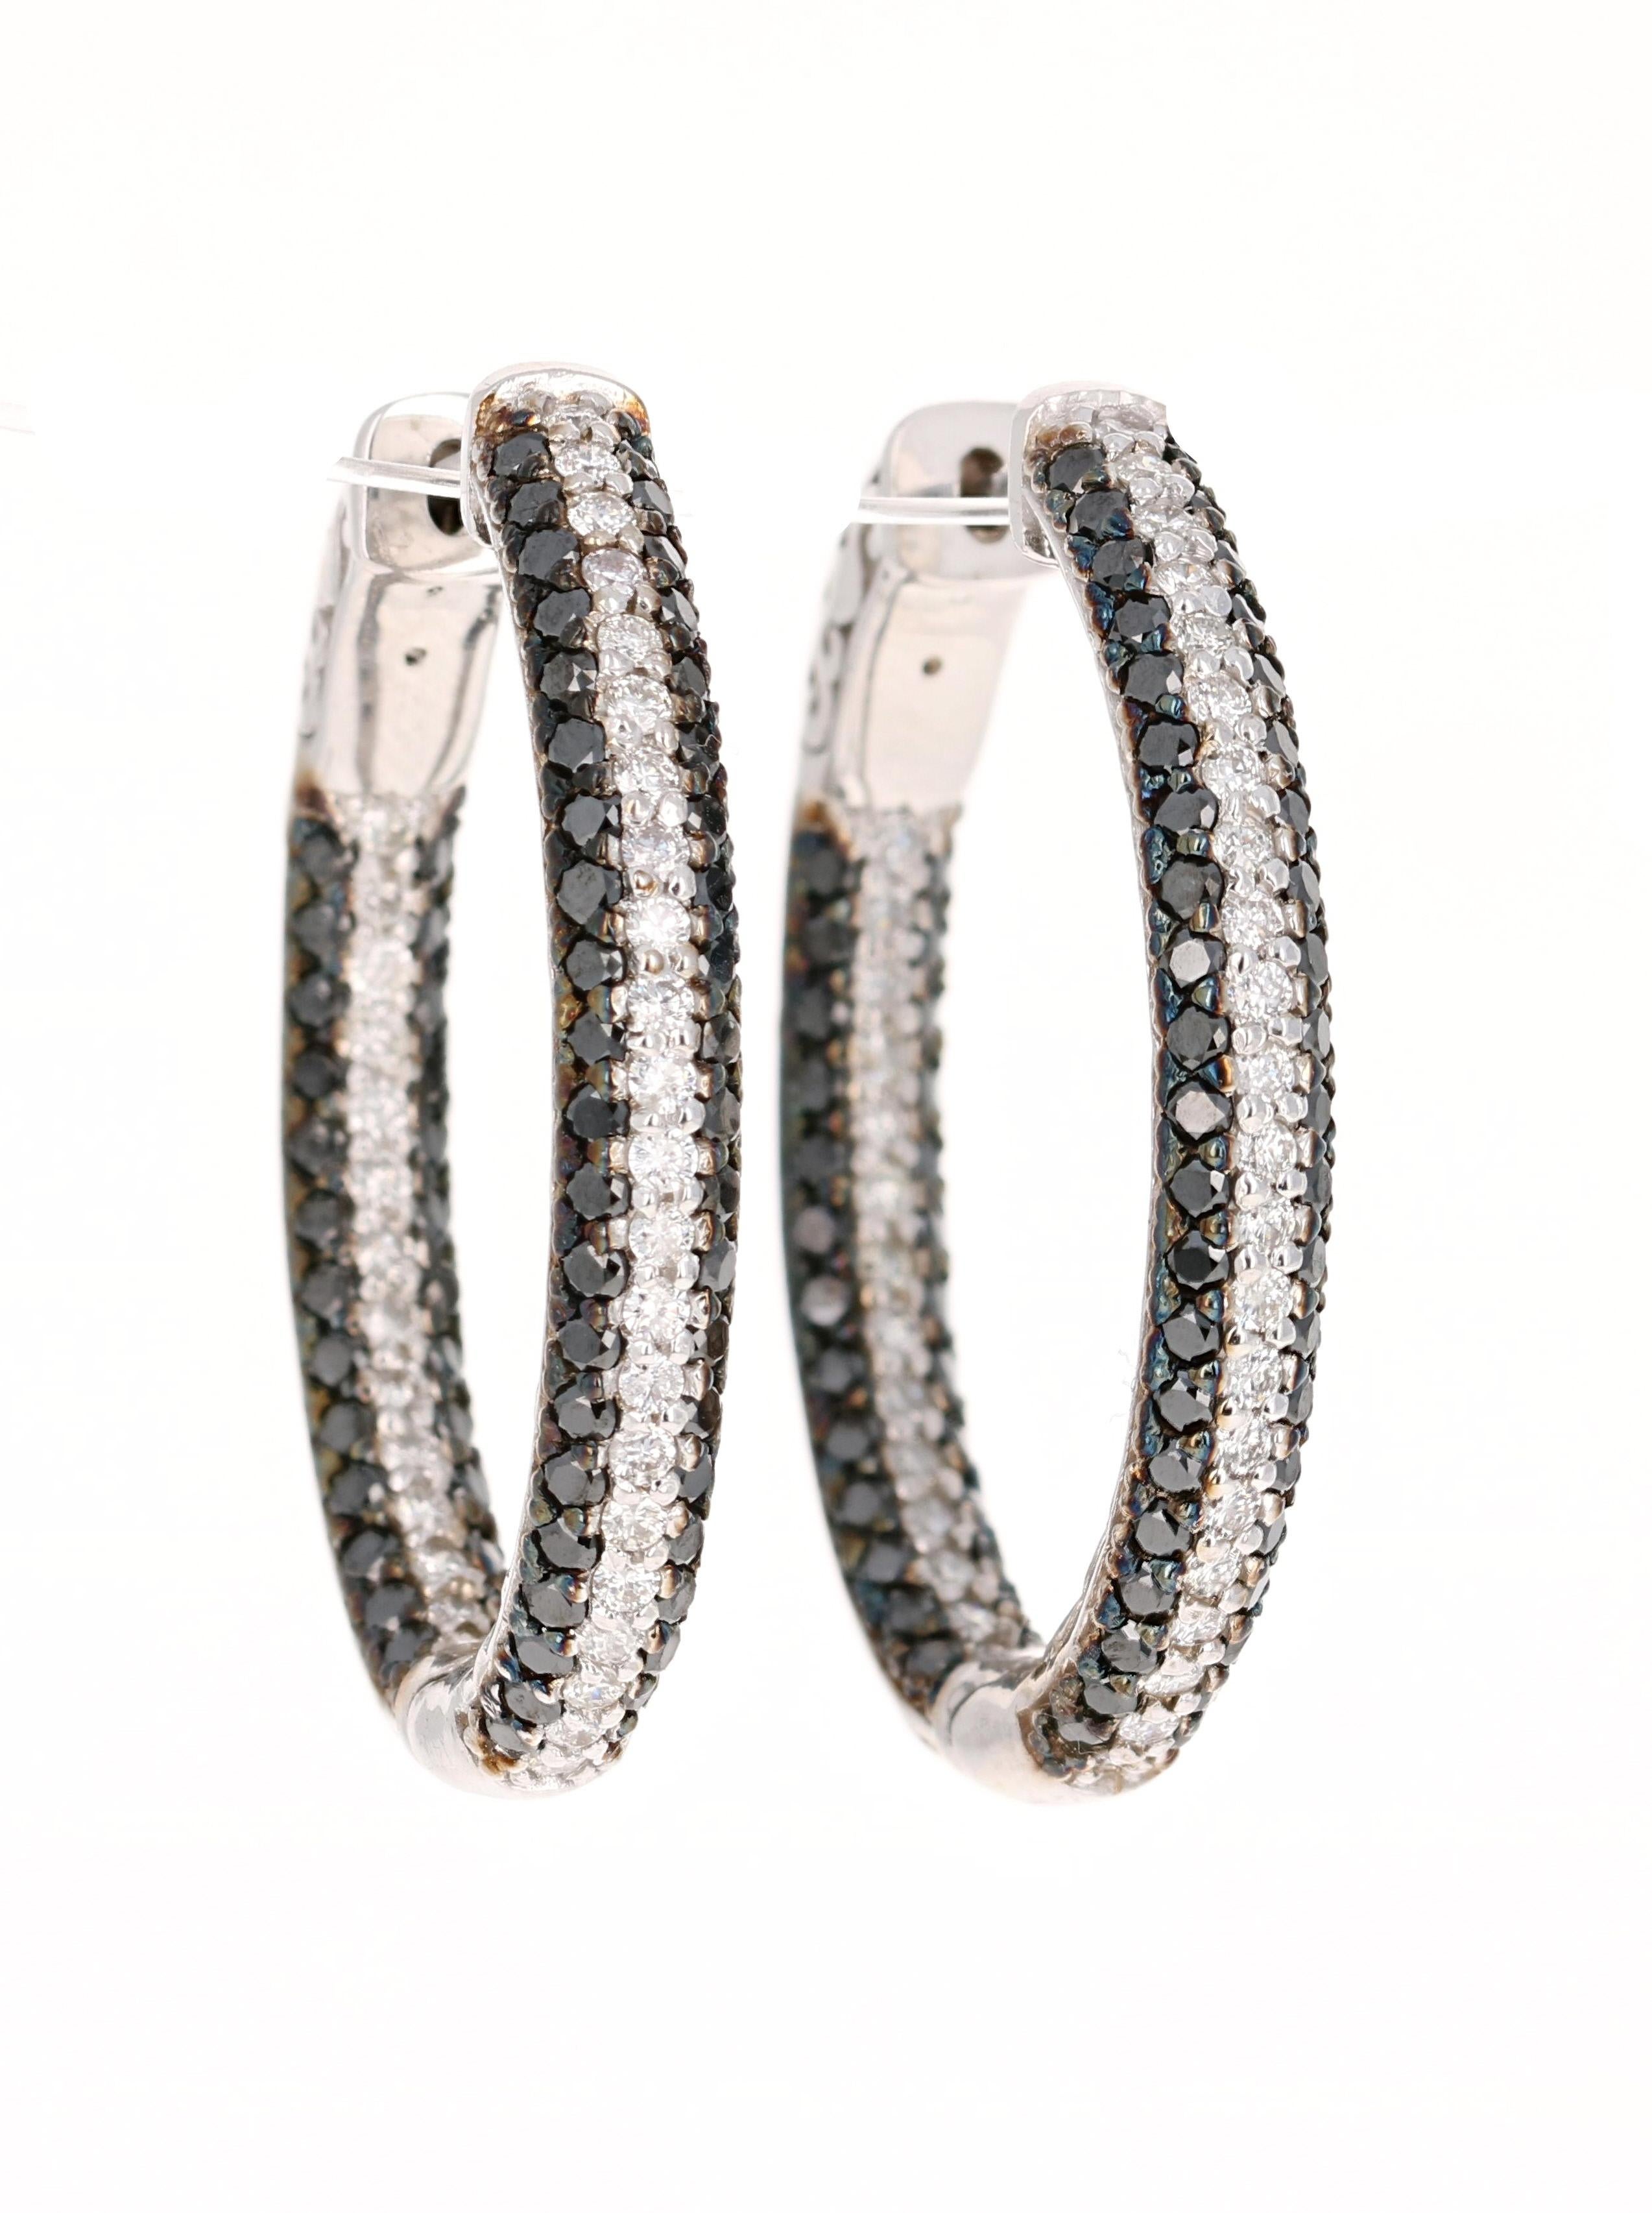 These hoop earrings have 136 Round Cut Black Diamonds that weigh 2.21 Carats and 72 Round Cut White Diamonds that weigh 1.00 Carat. The total carat weight of the earrings are 3.21 Carats. 

Curated in 14 Karat White Gold they weigh approximately